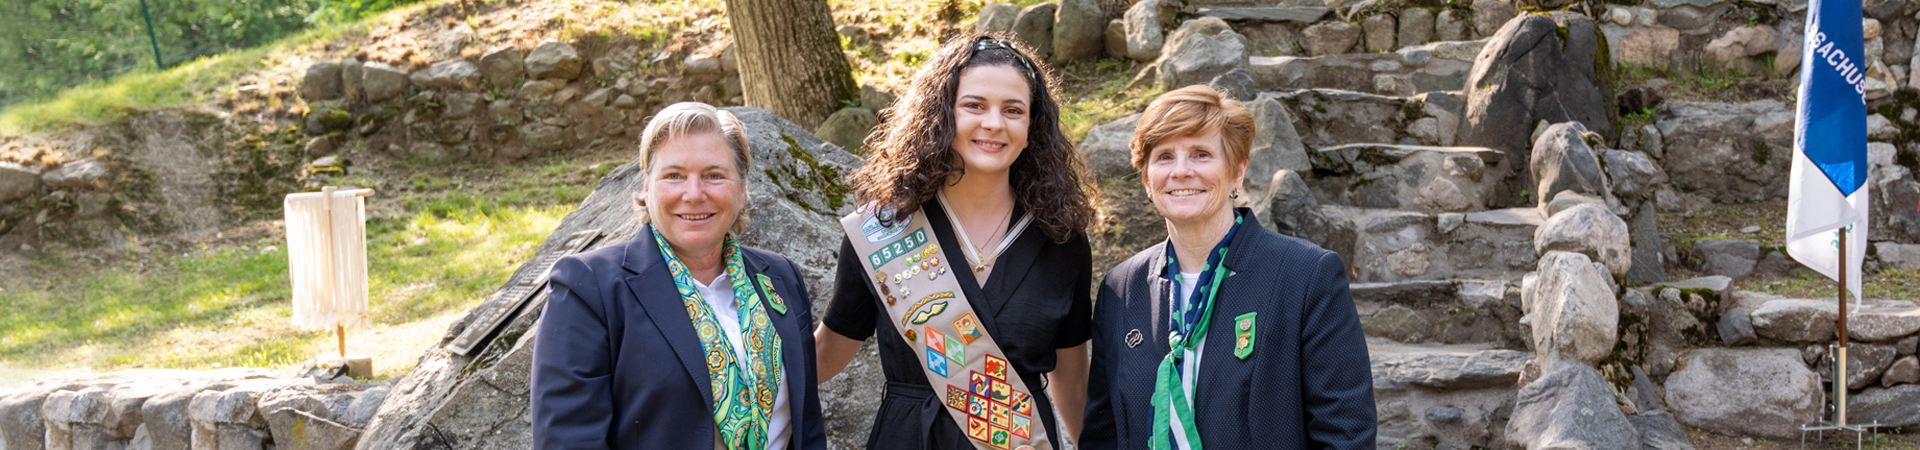  ©Ann-Marie Ford - Gold Award Girl Scout with CEO and Board President 